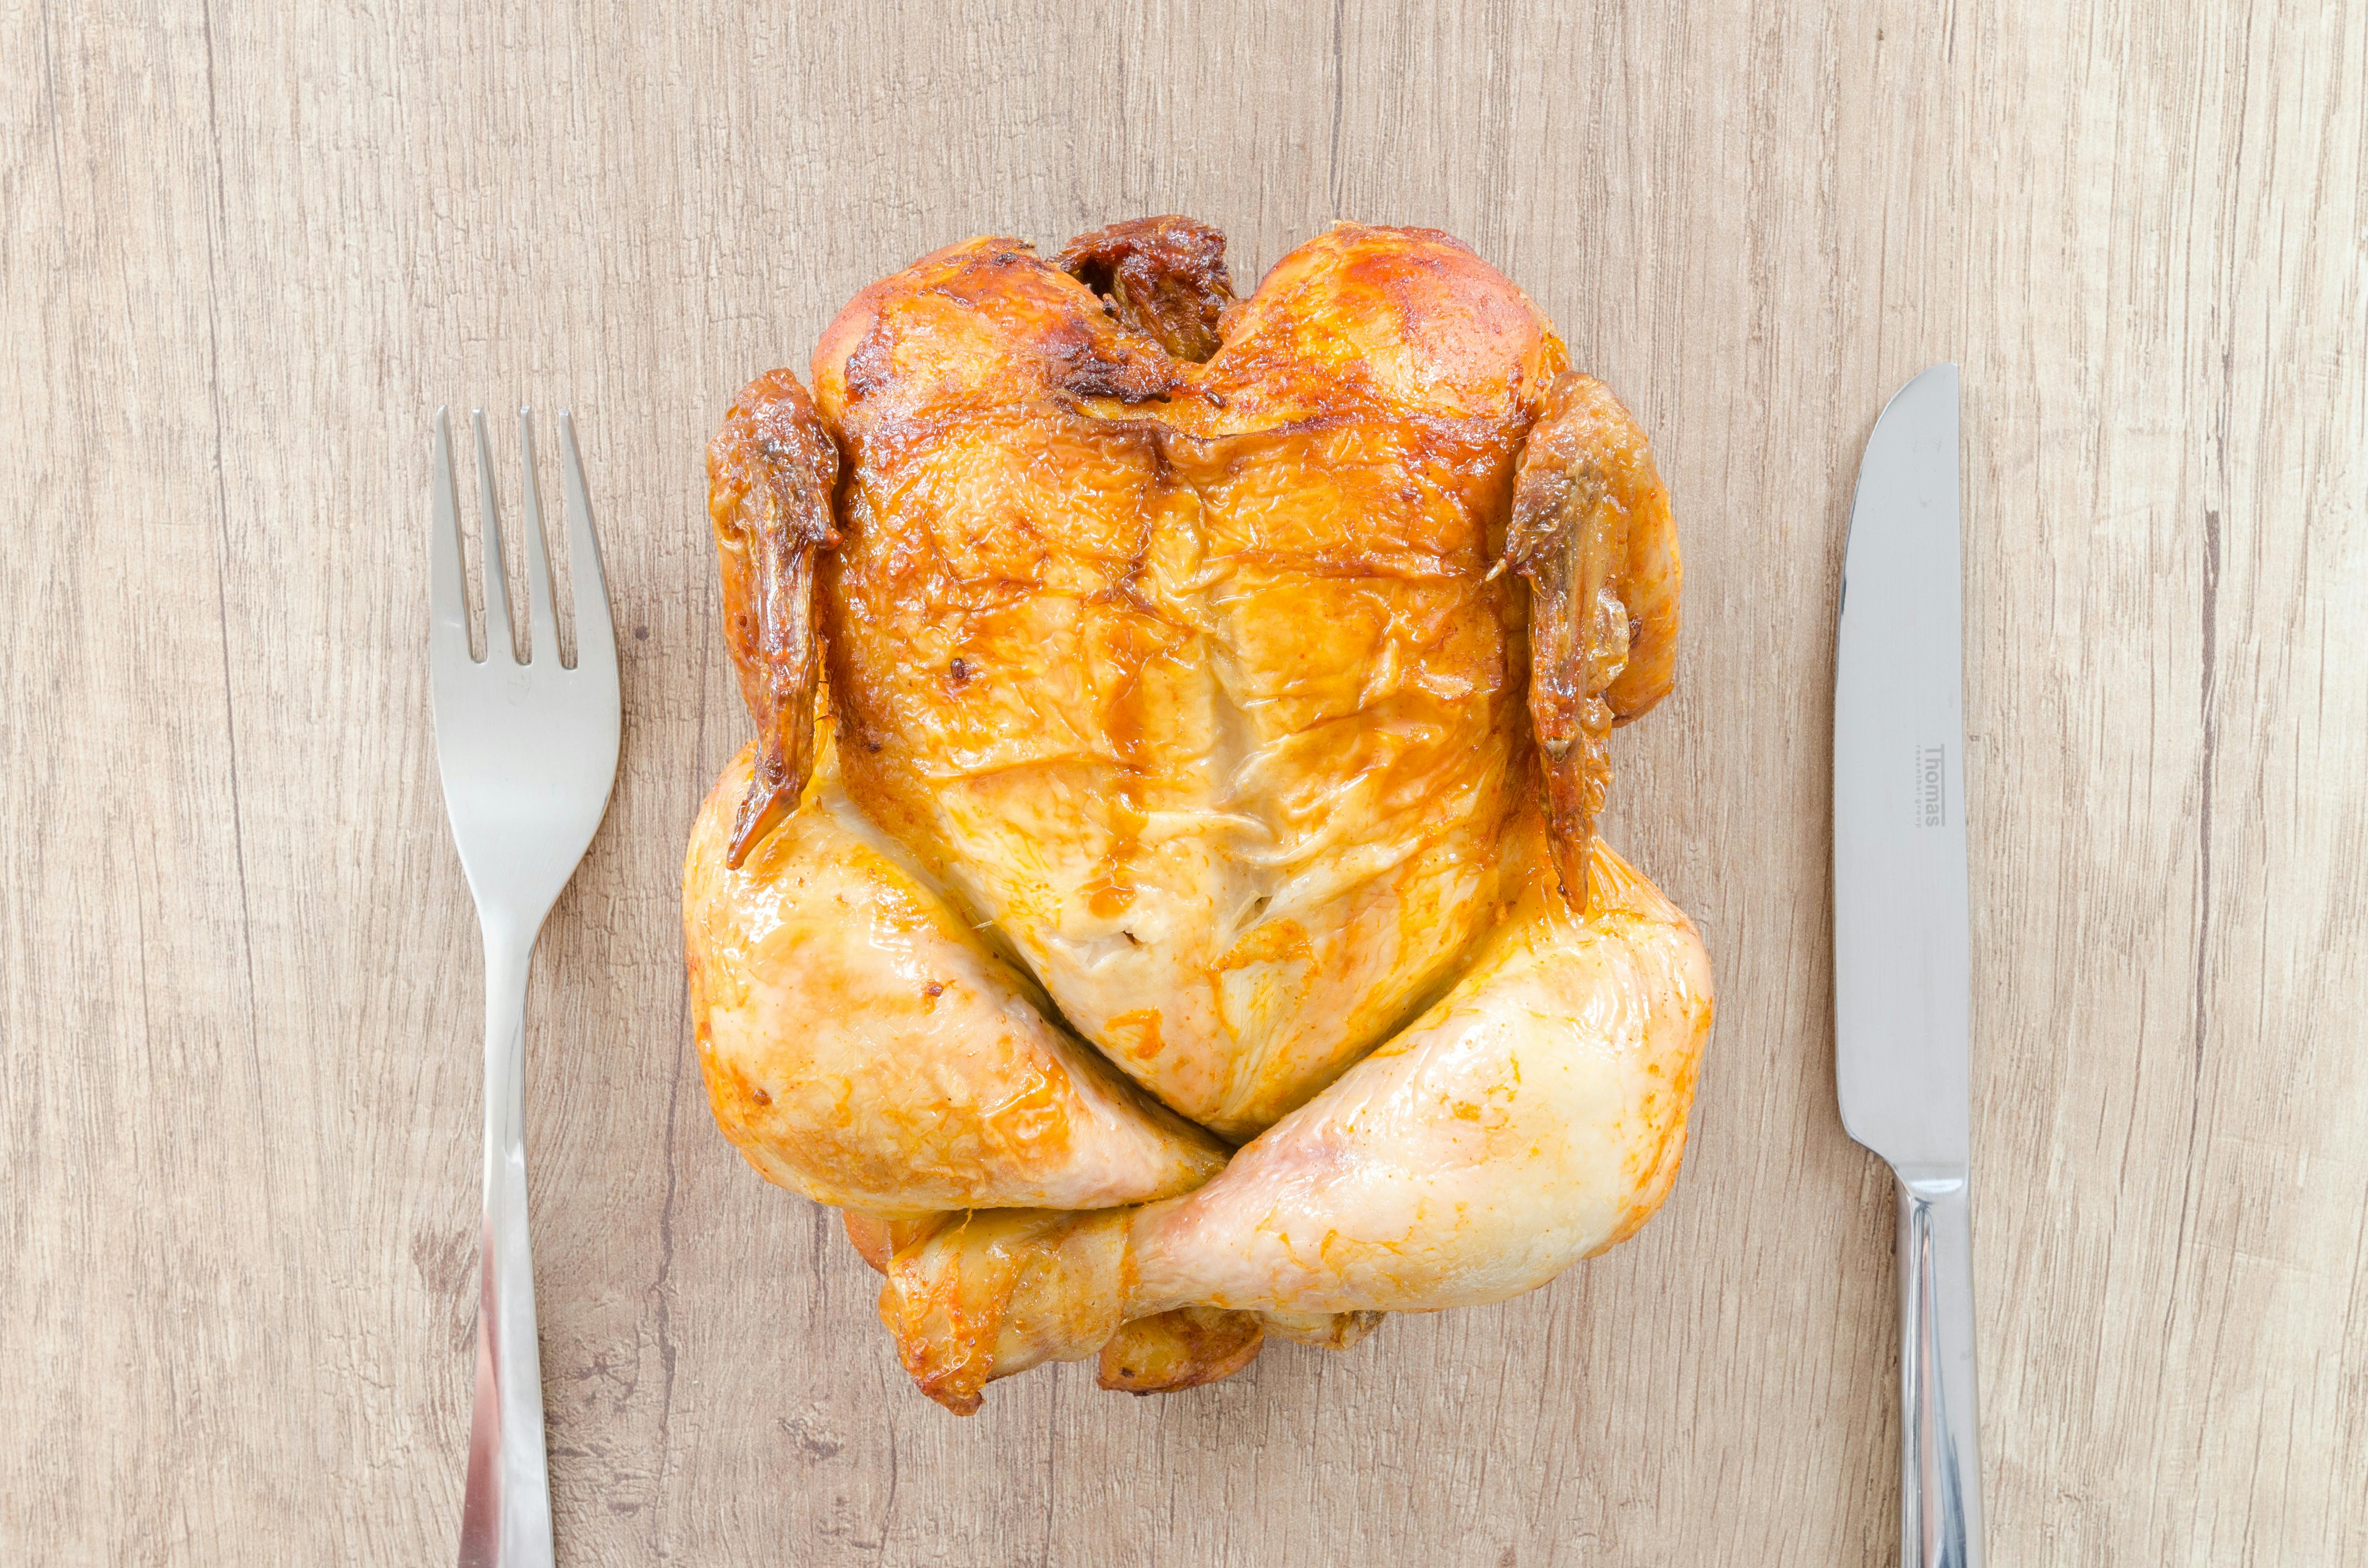 A roasted chicken. | Photo: Pexels